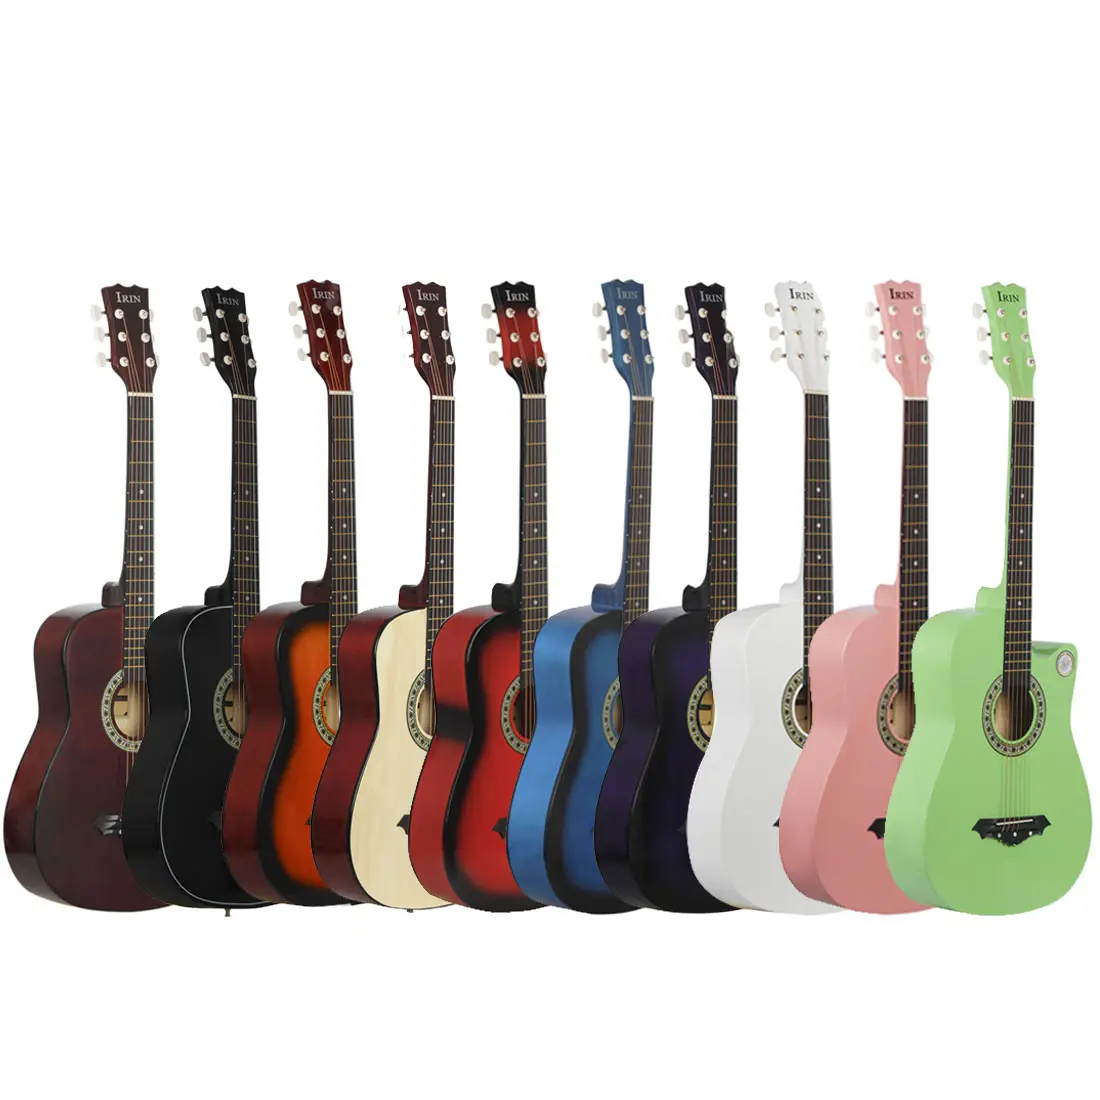 IRIN Chinese manufacturer's high selling and cheap 38-inch handmade folk acoustic guitar